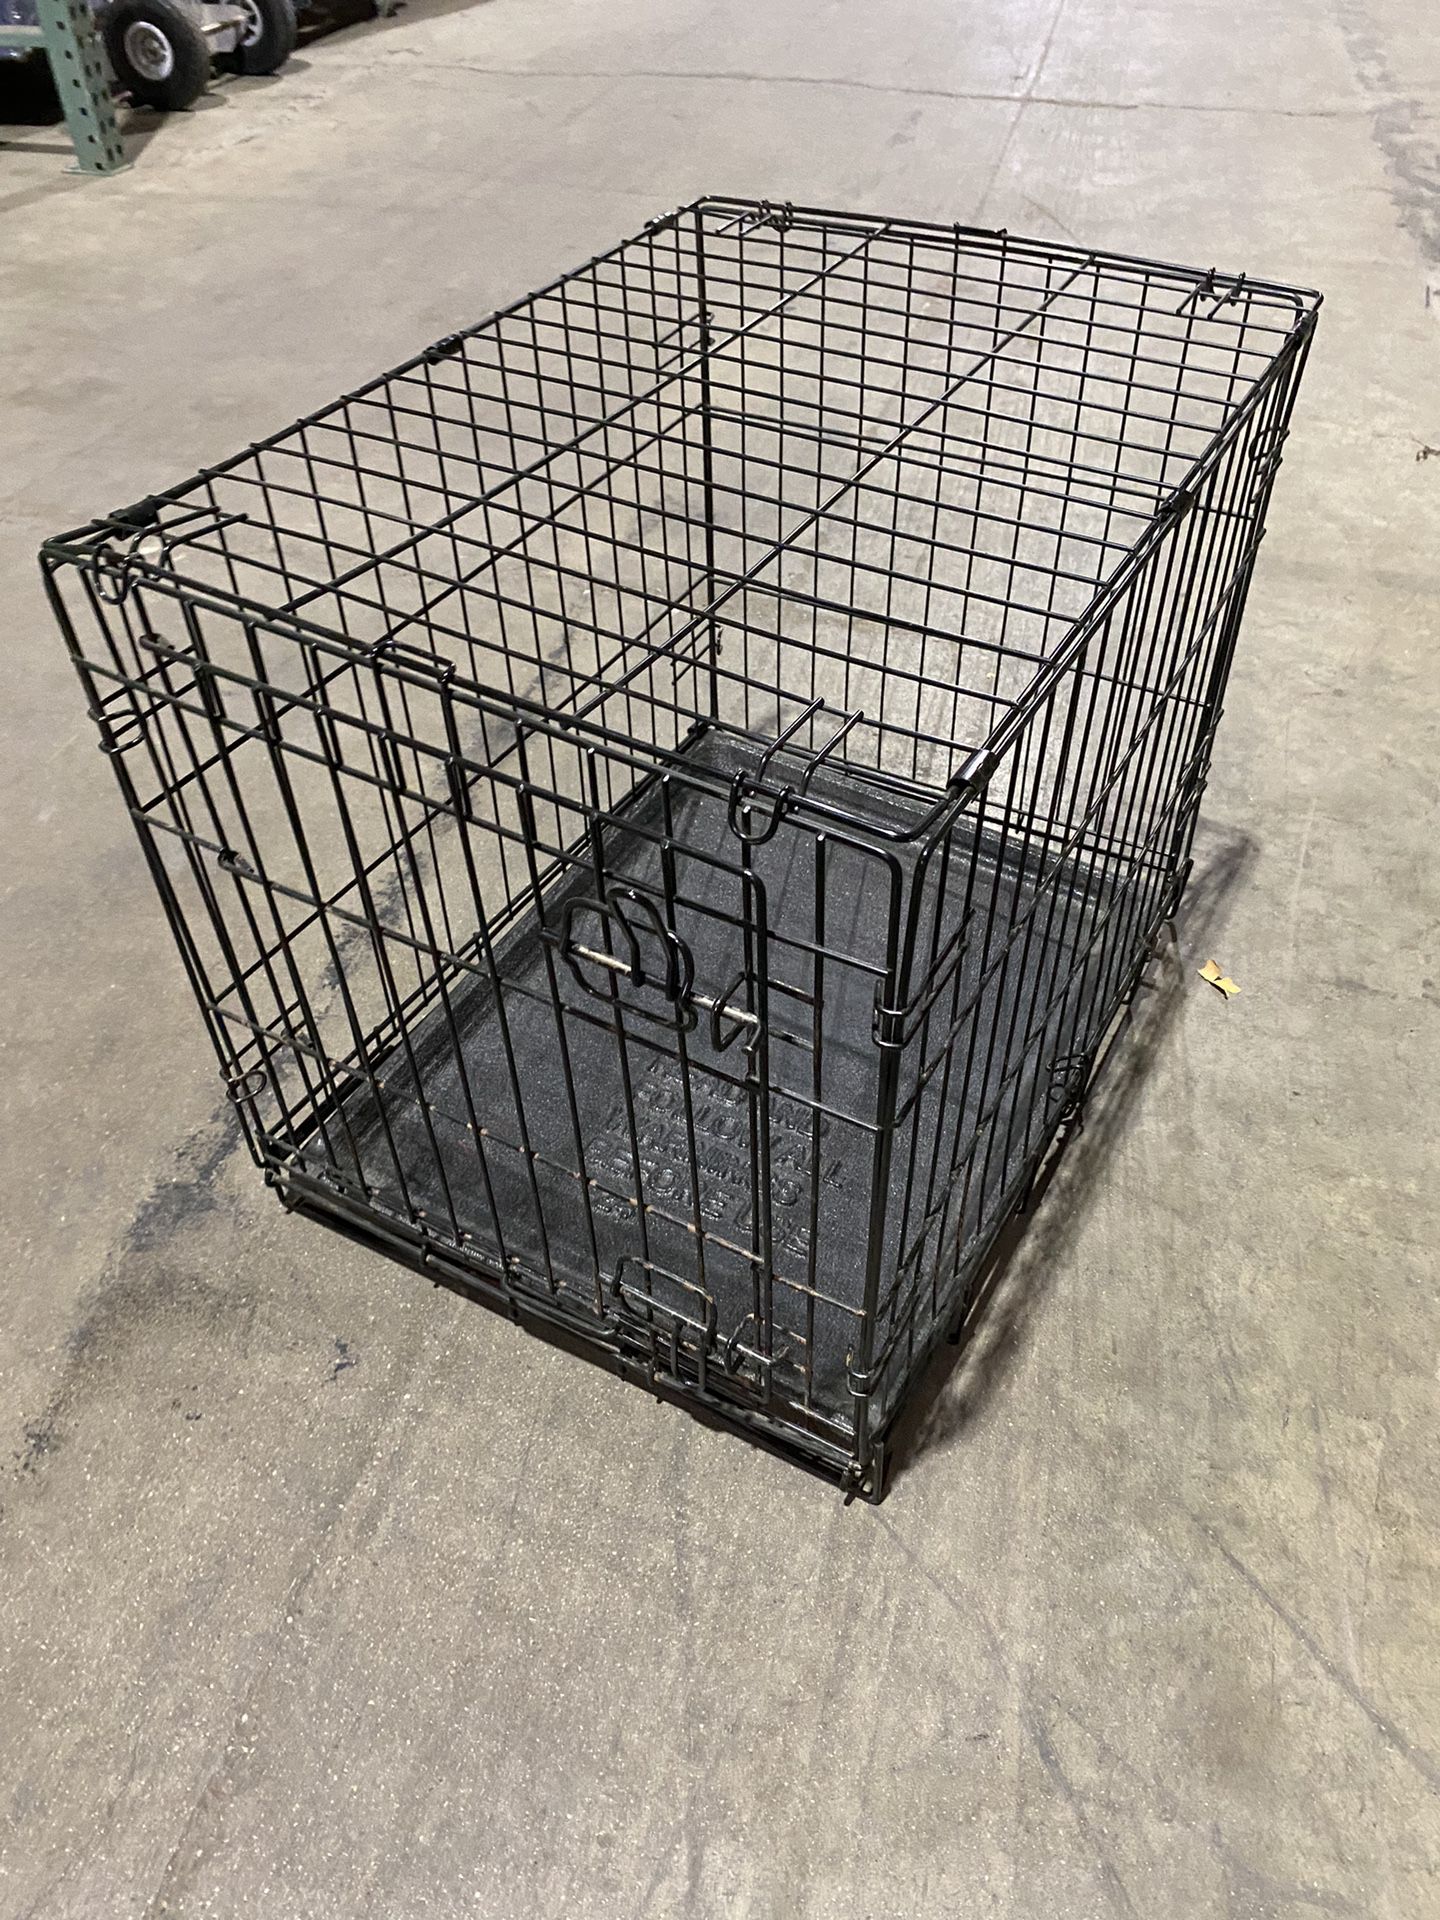 24” Dog Kennel W Tray And Door 